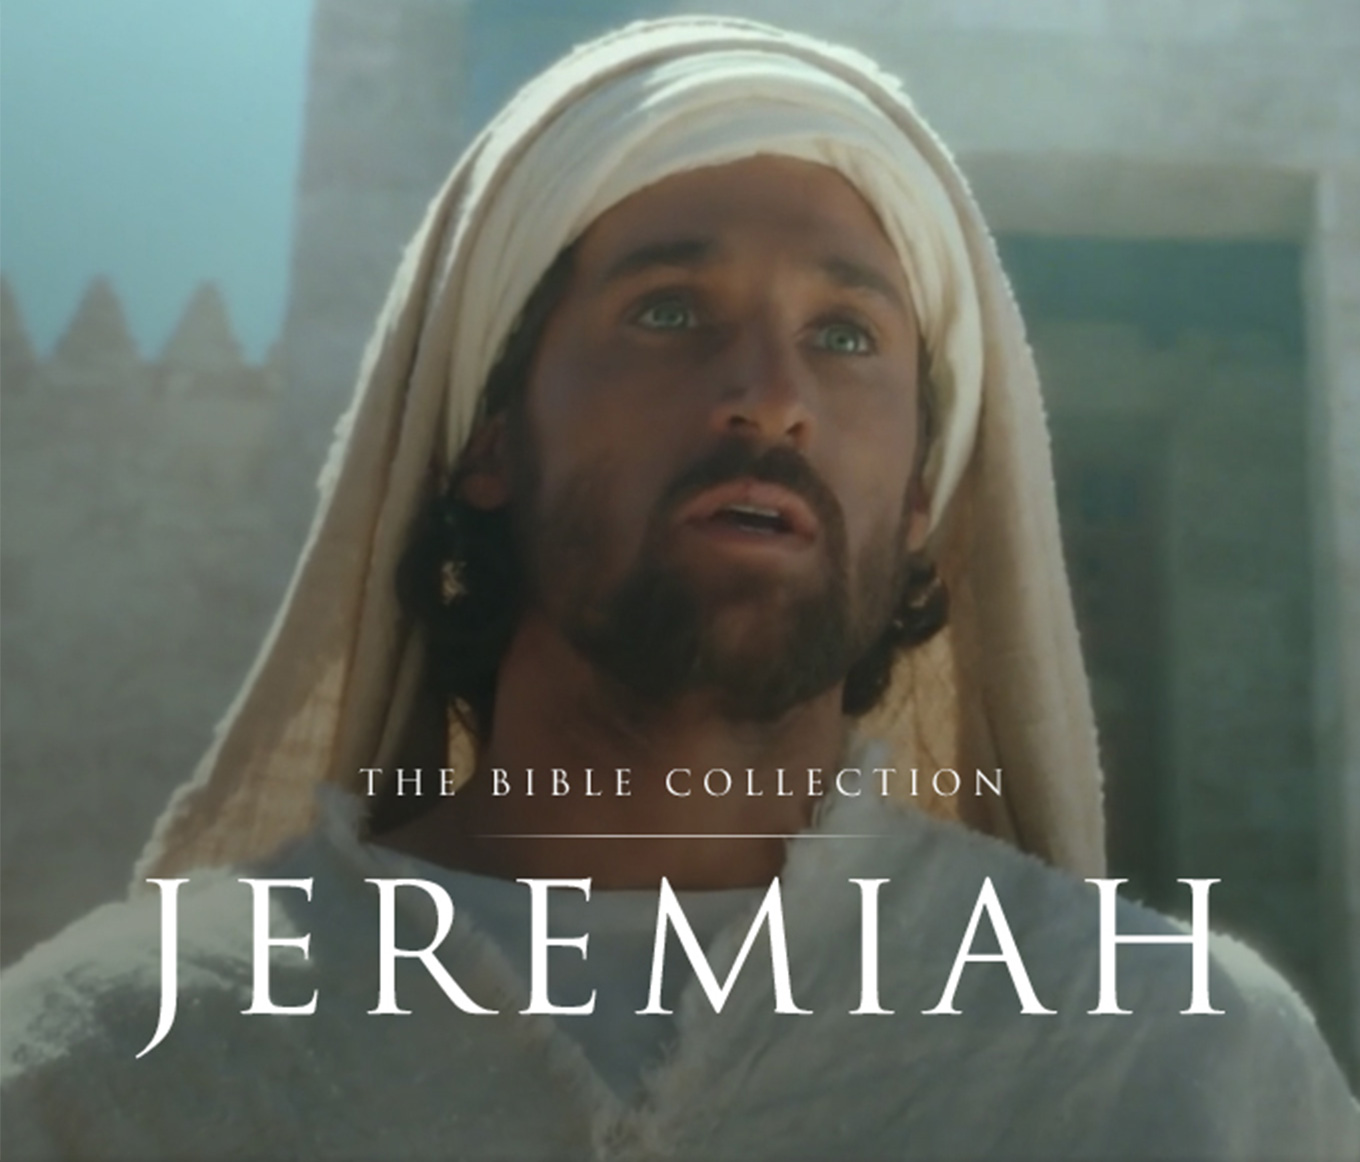 The Bible Collection: Jeremiah movie poster